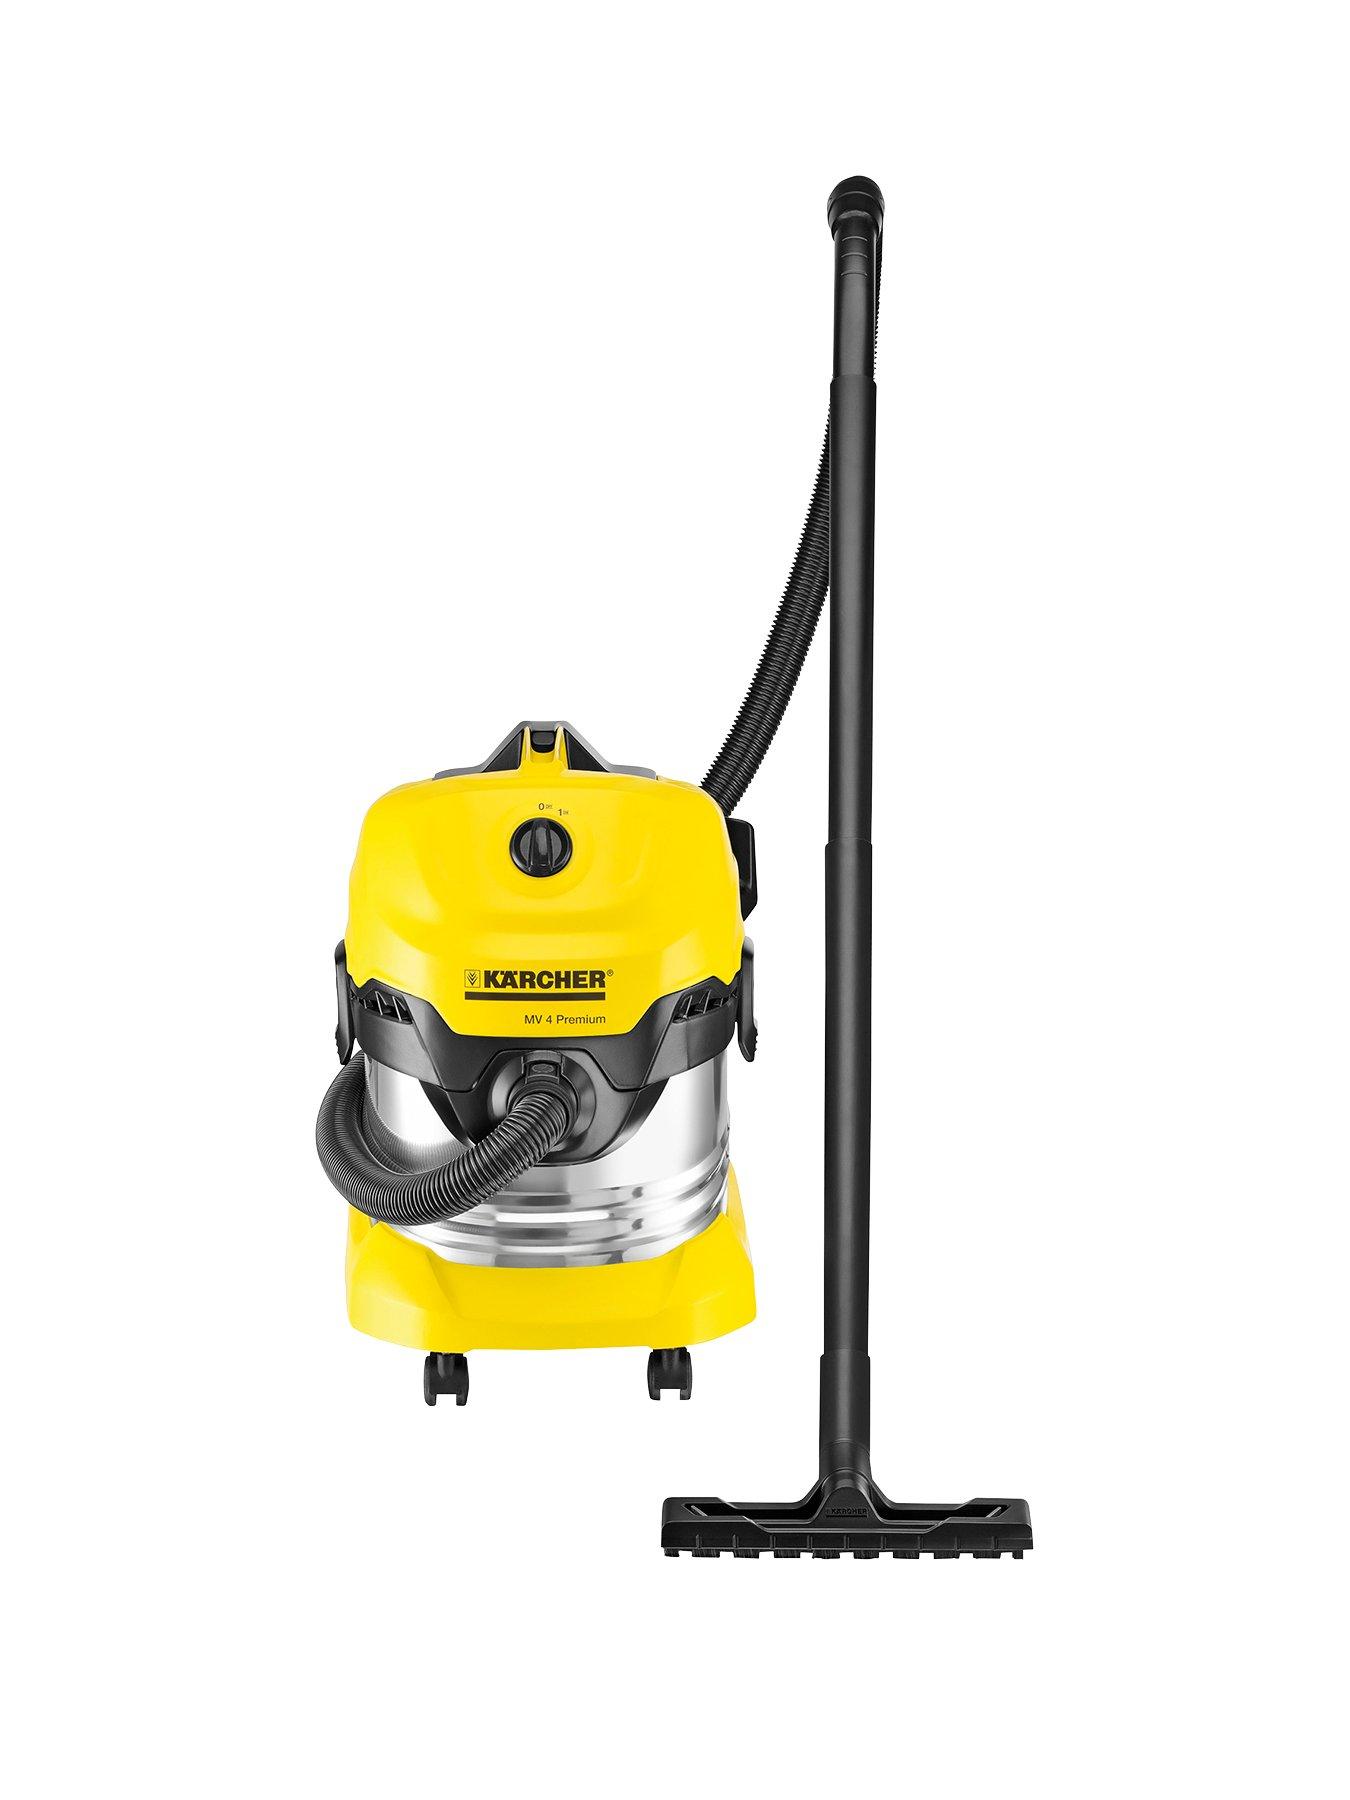 Karcher Wd4 Multifunction Cleaner Review thumbnail